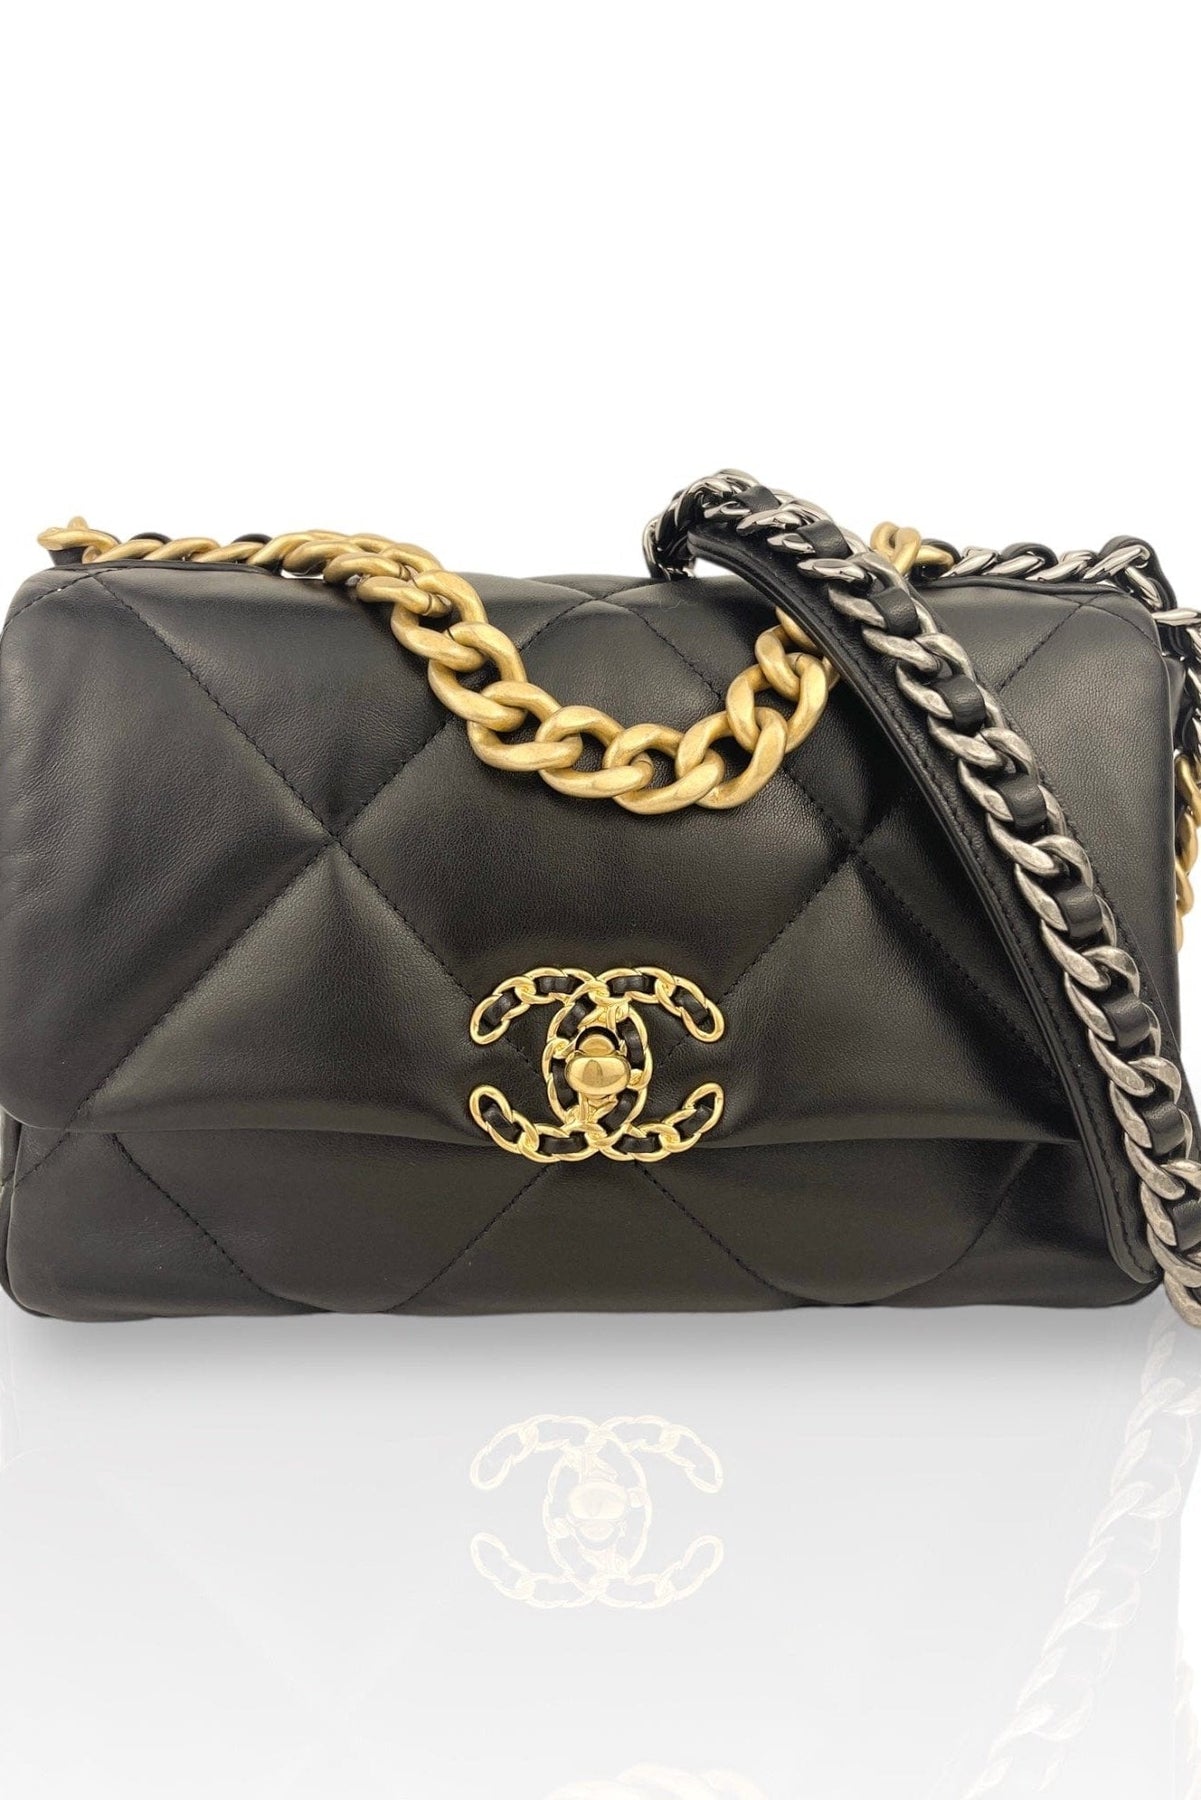 Buy Exclusive Metallic Silver Chanel Classic Flap at REDELUXE - Luxurious  Pre-Owned Handbags on Sale! – RD